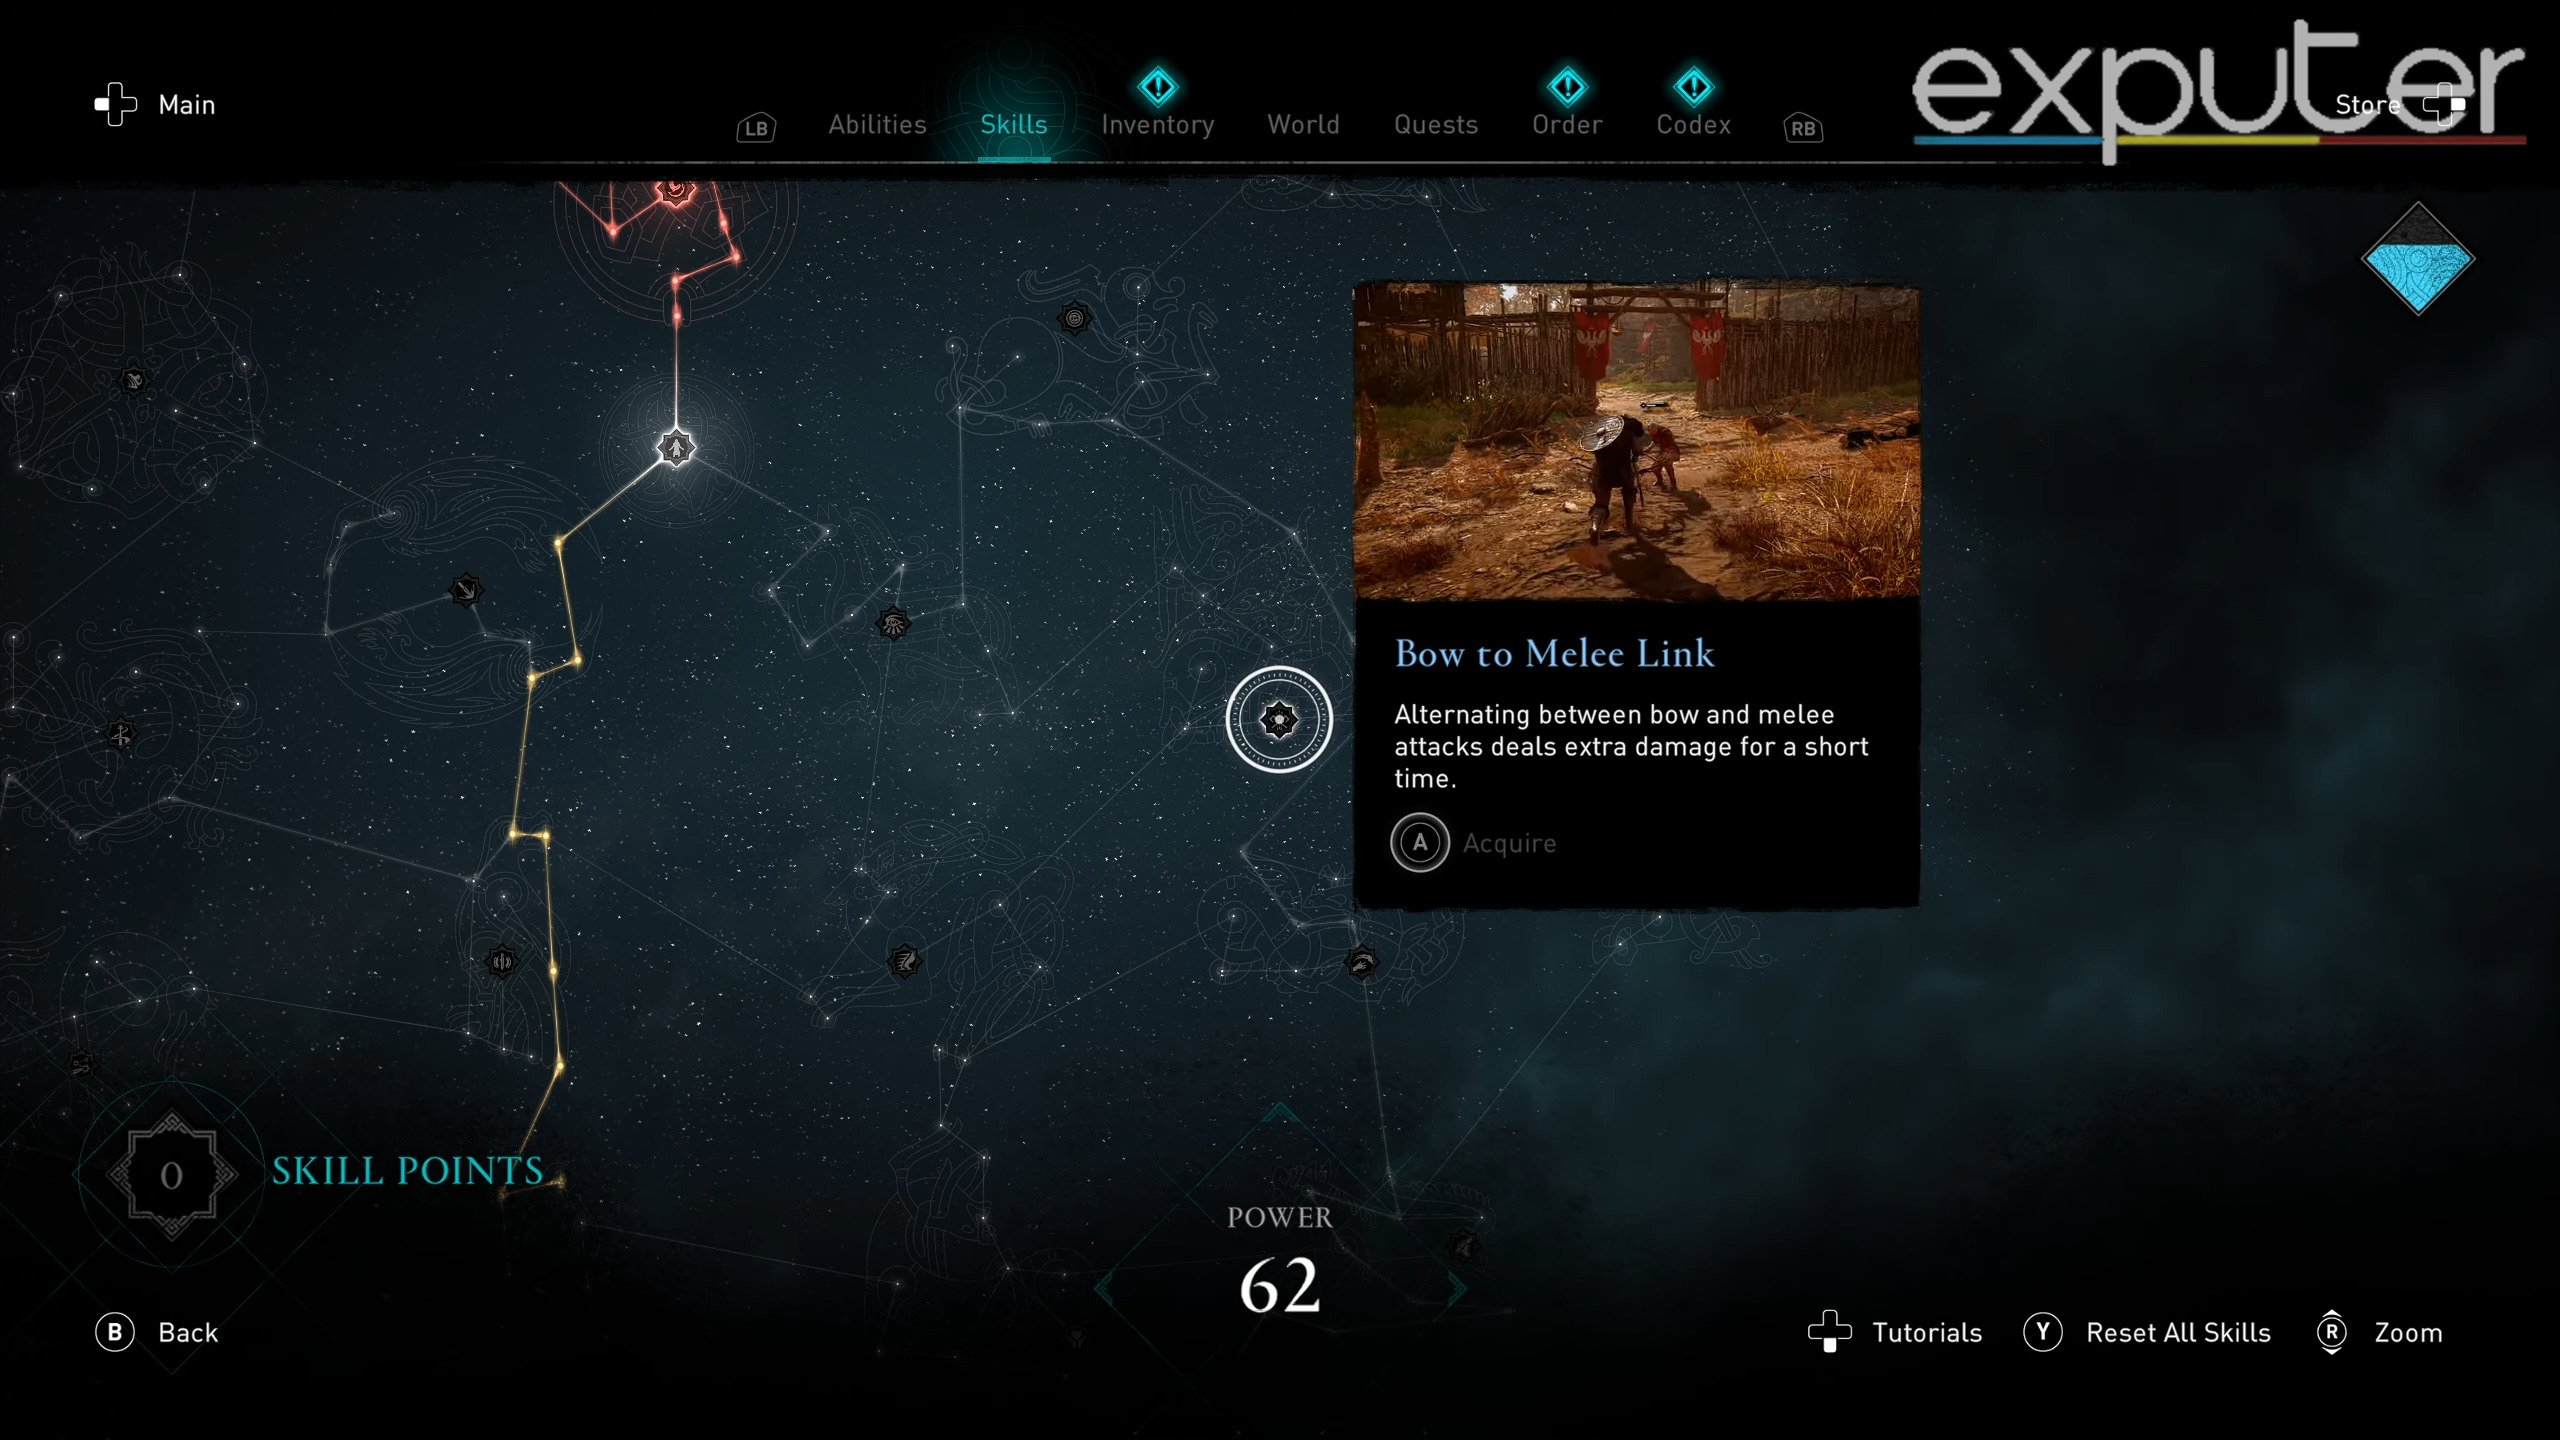 Assassin's Creed Valhalla Skill Tree Bow to Melee Link